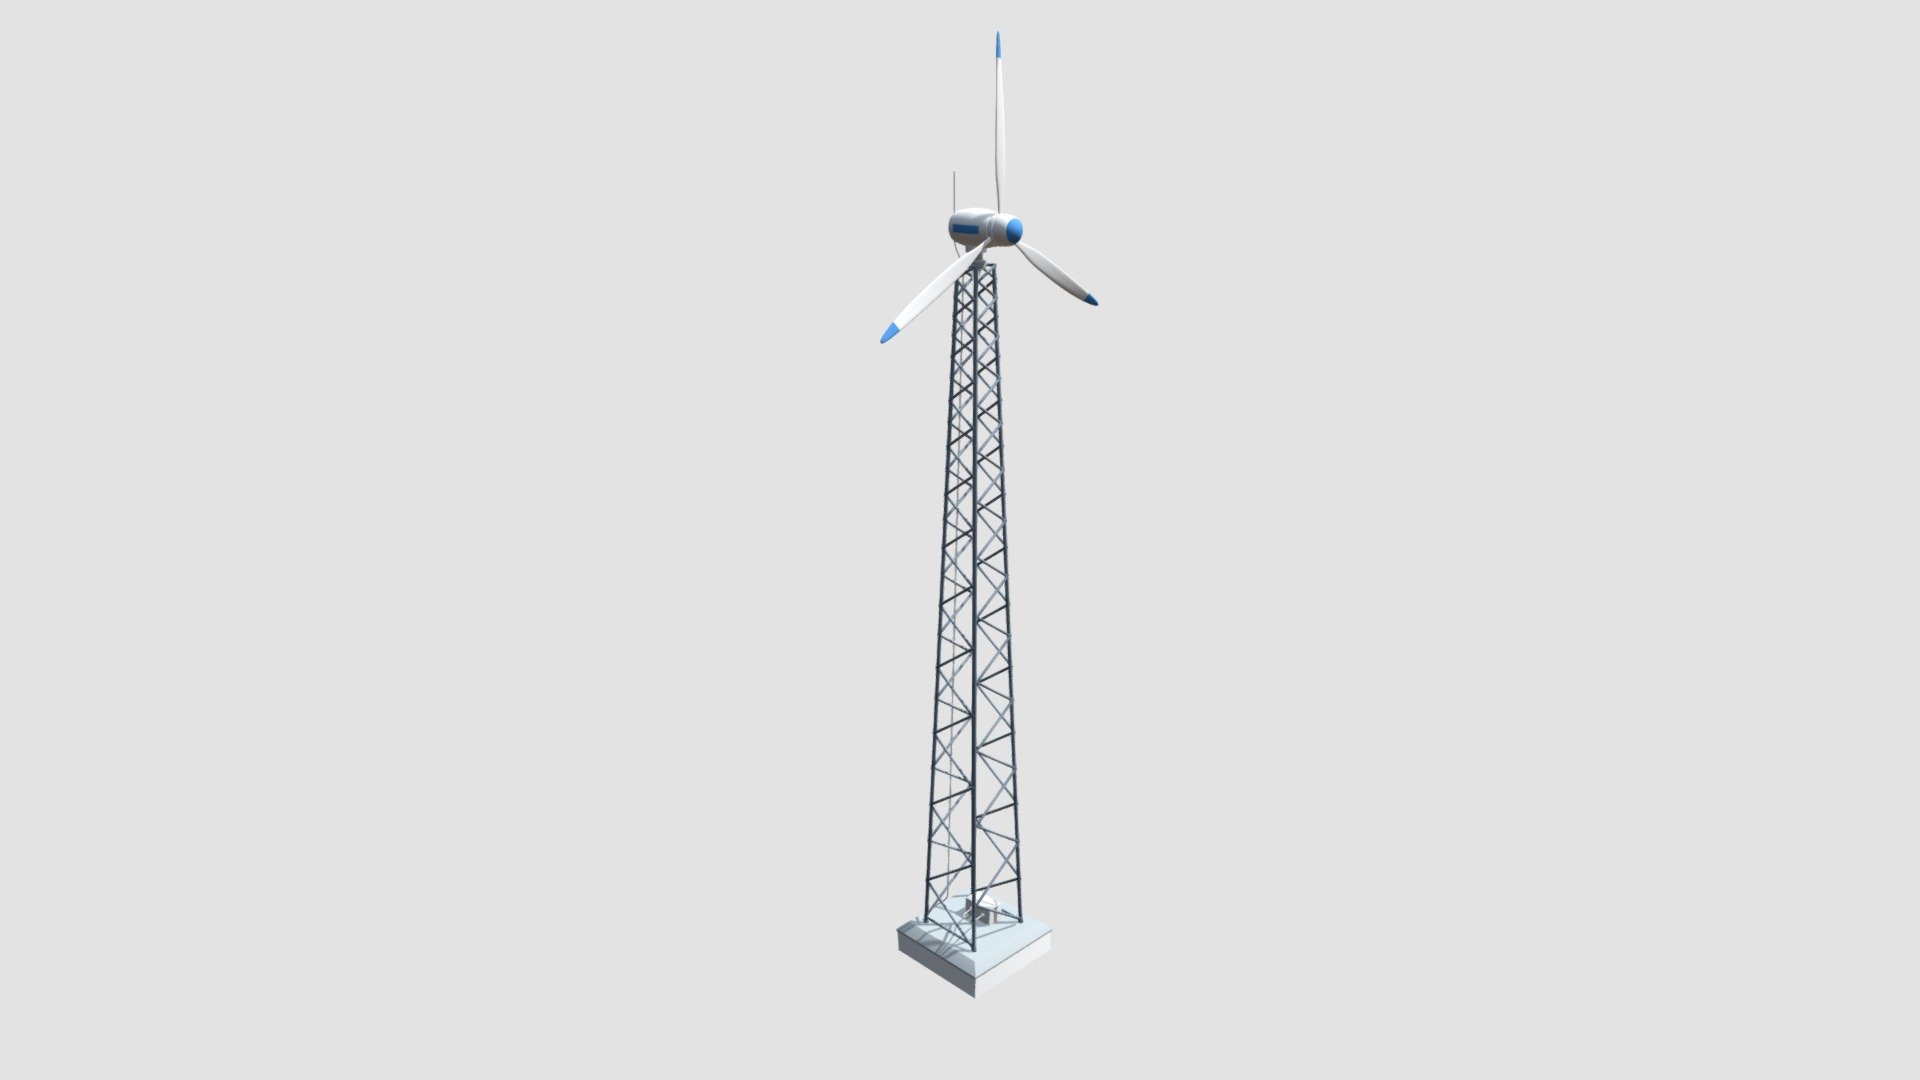 High detailed model of wind turbine design with all textures, shaders and materials. It is ready to use, just put it into your scene 3d model